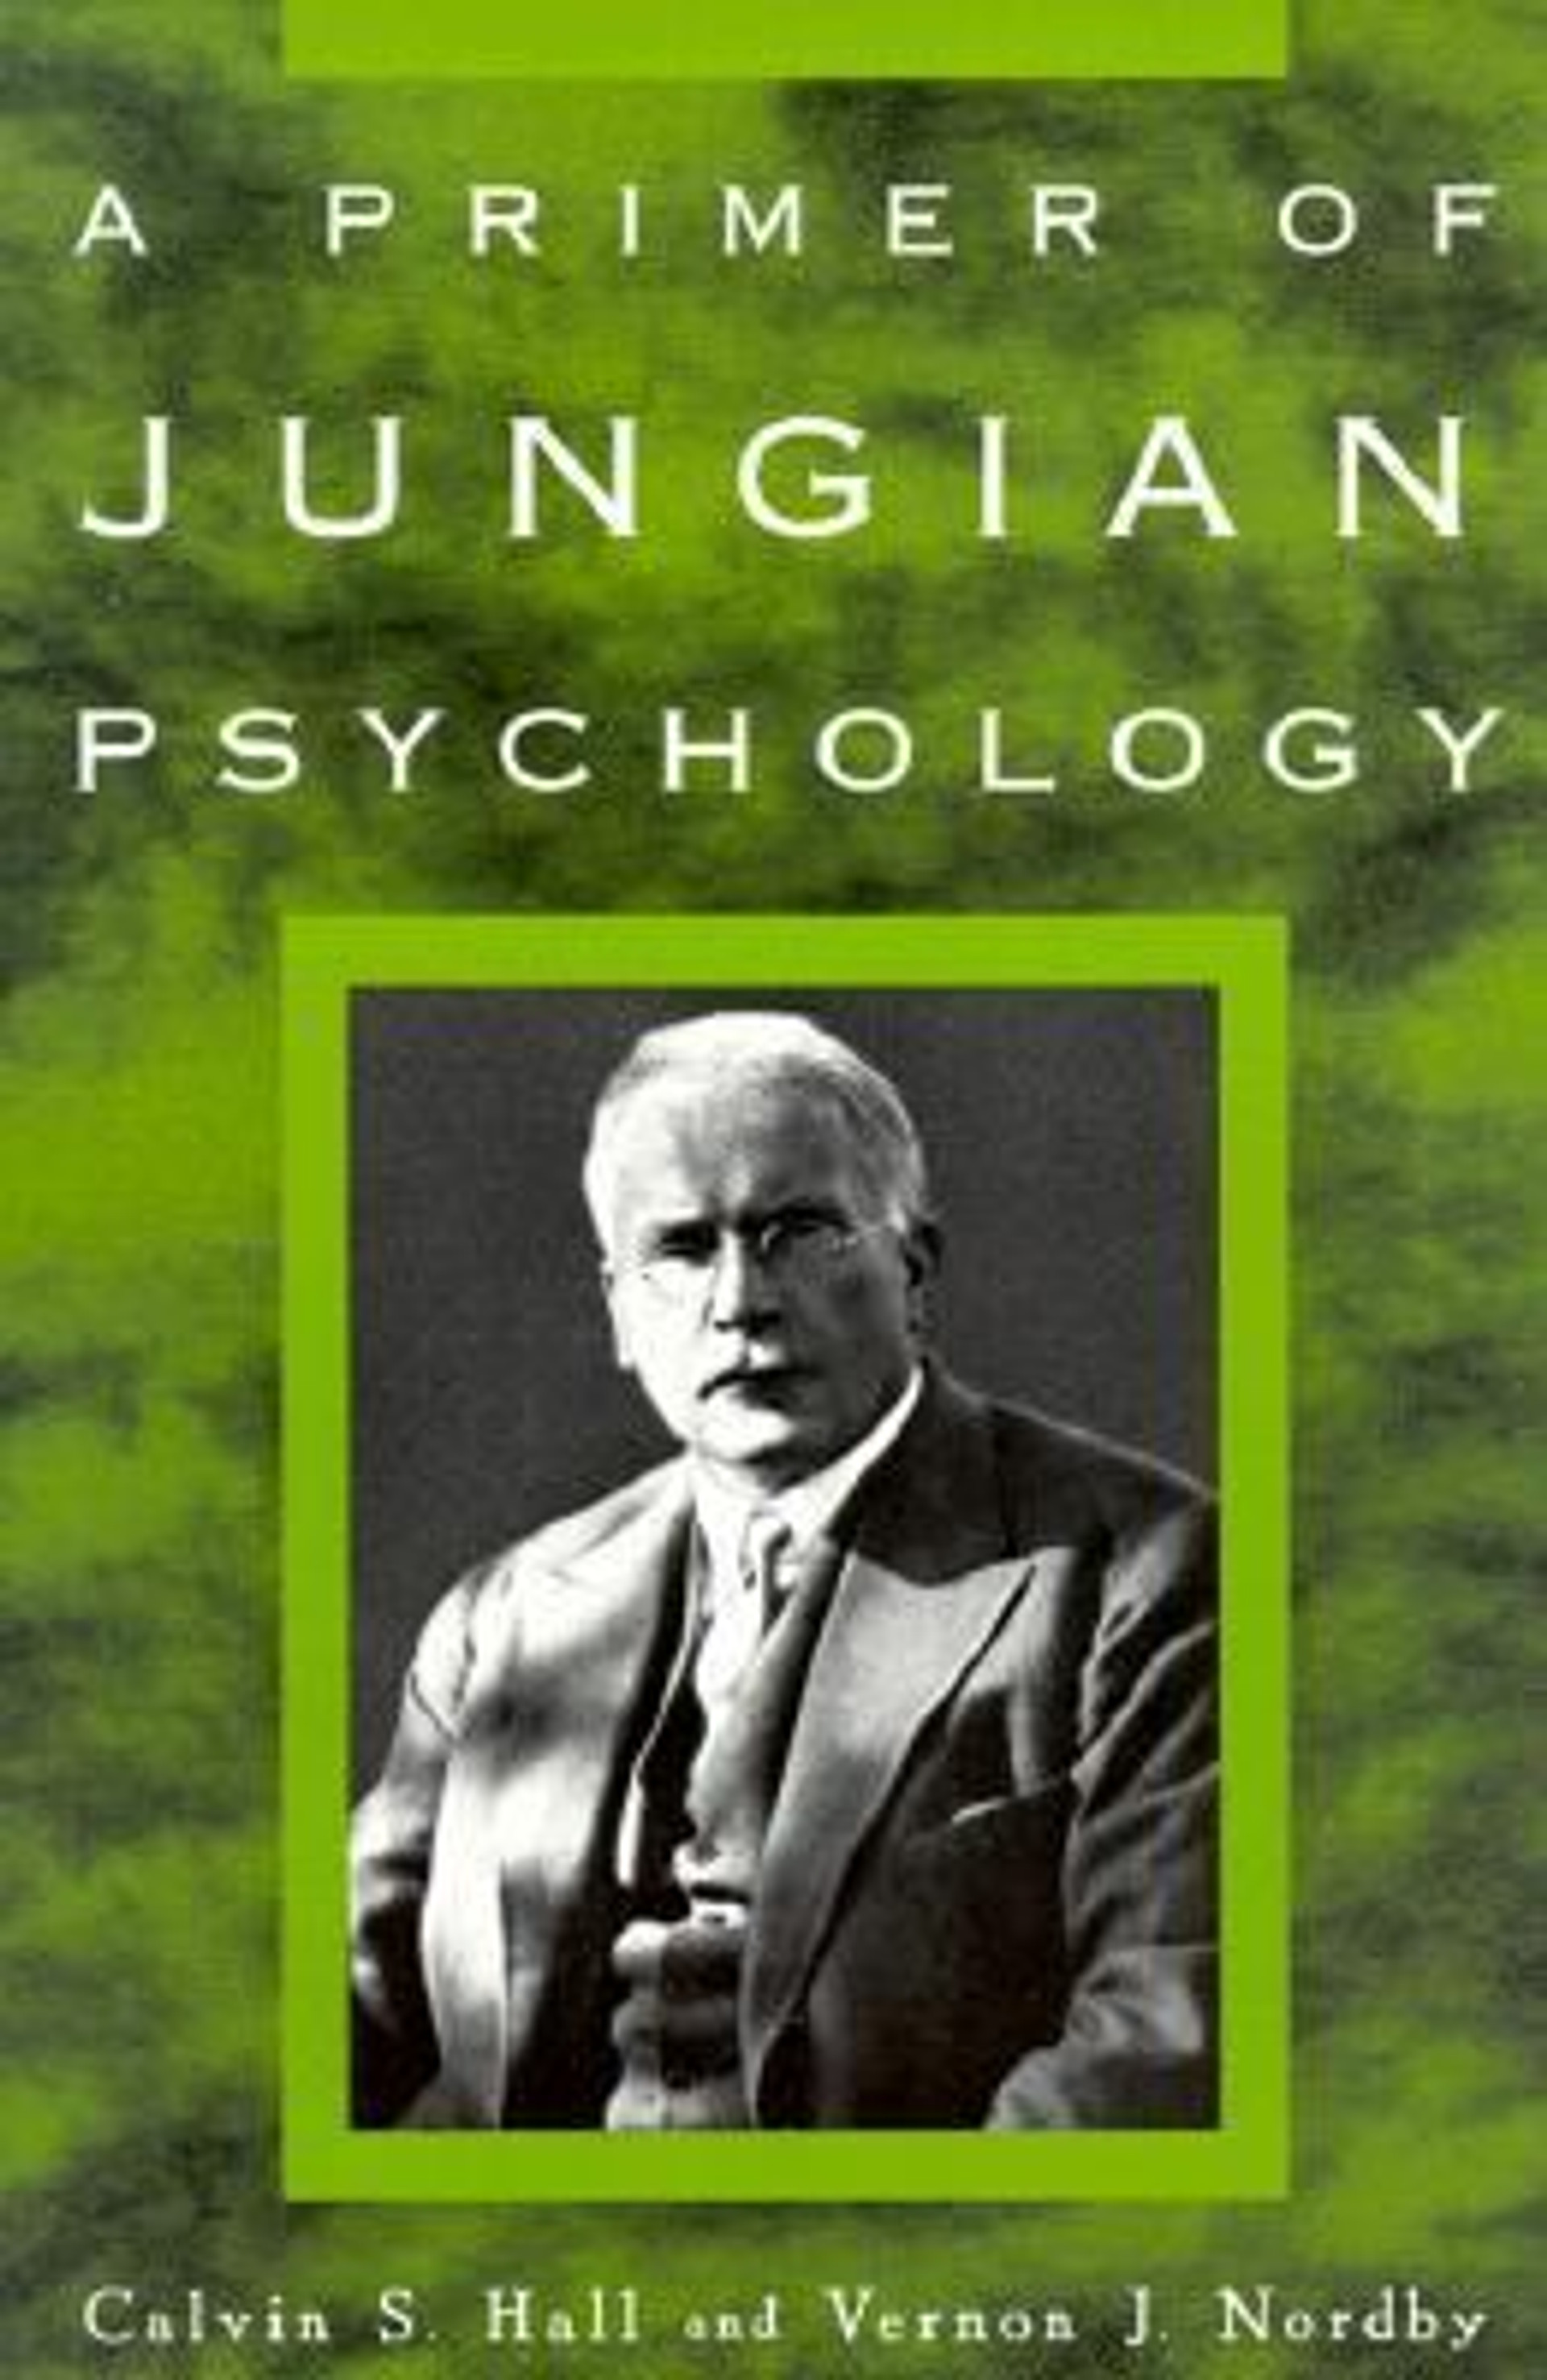 phd in jungian psychology